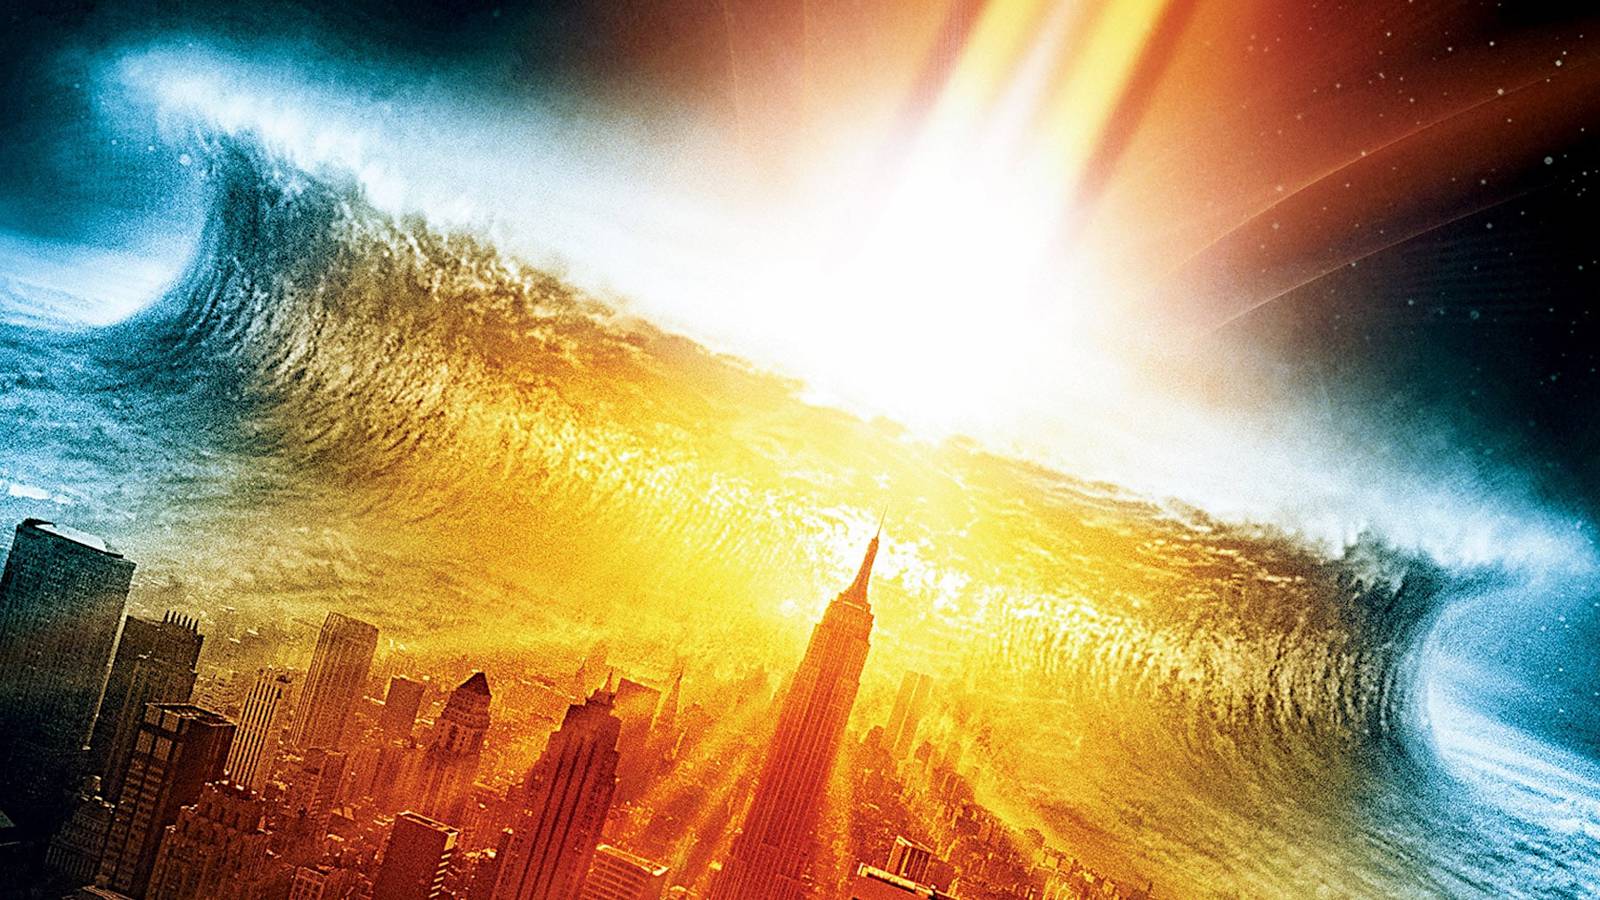 The 16 Best Movies About an Impending Apocalypse